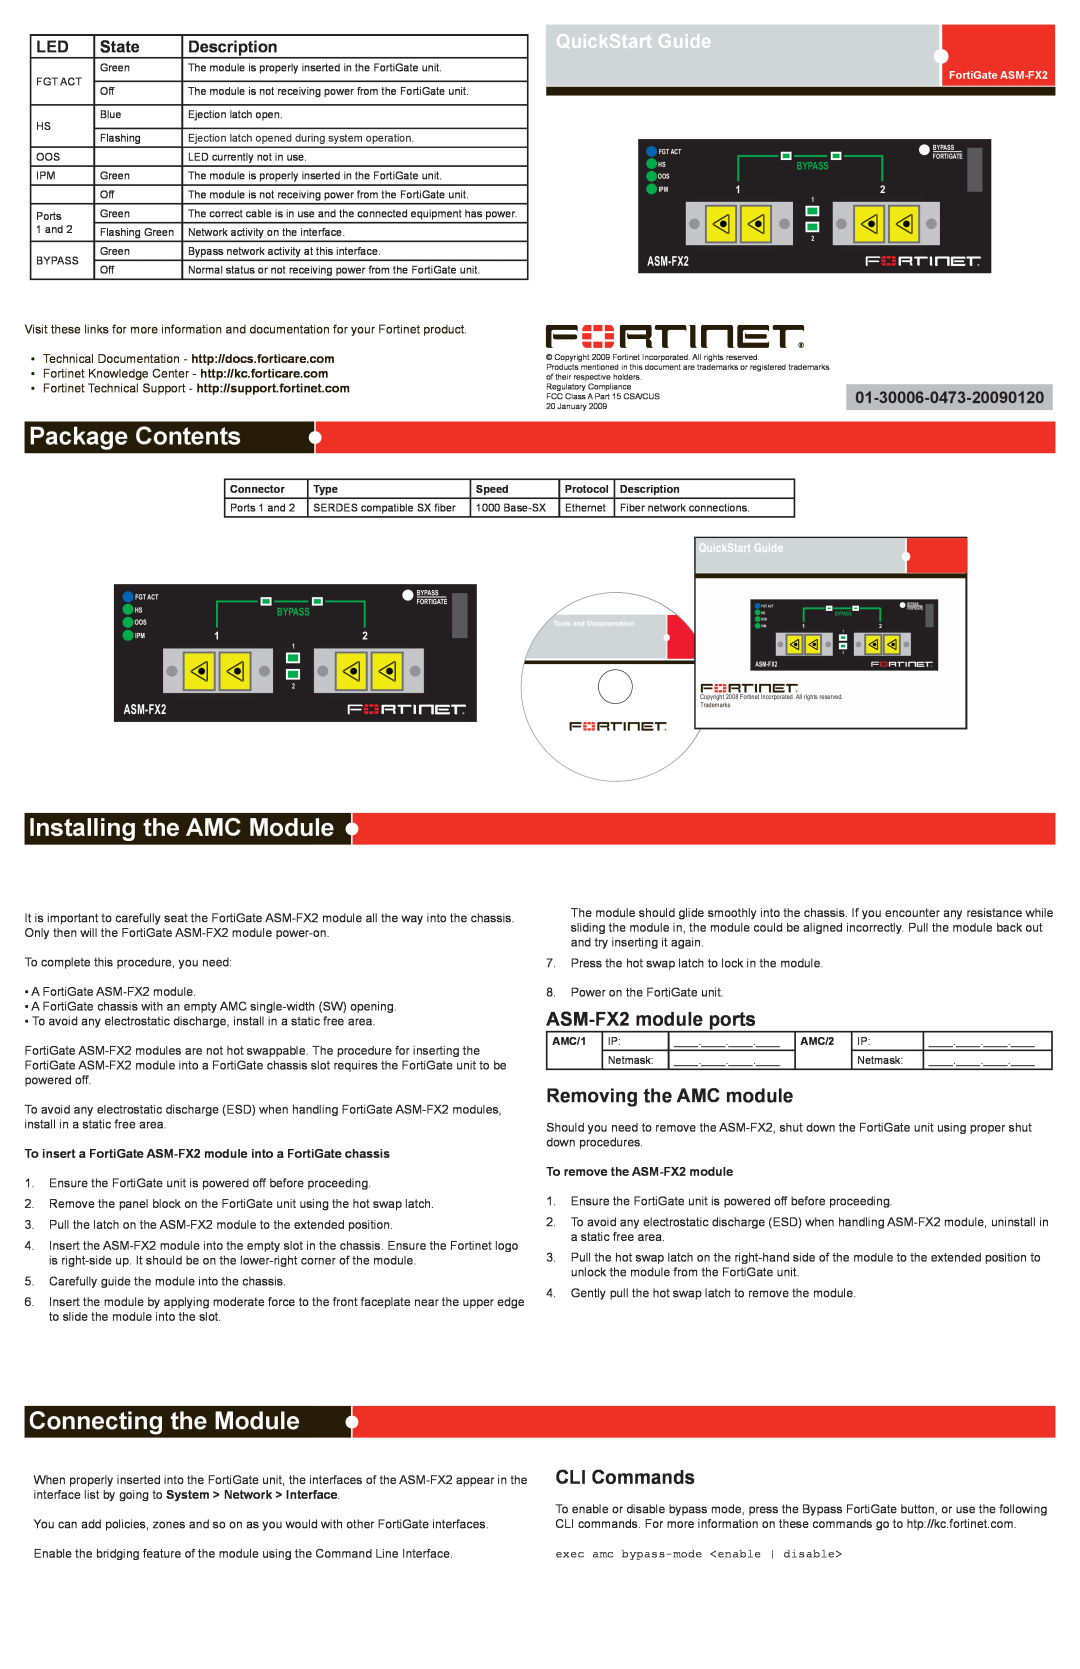 Fortinet ASM-FX2 quick start Package Contents, Installing the AMC Module, Connecting the Module, QuickStart Guide, State 